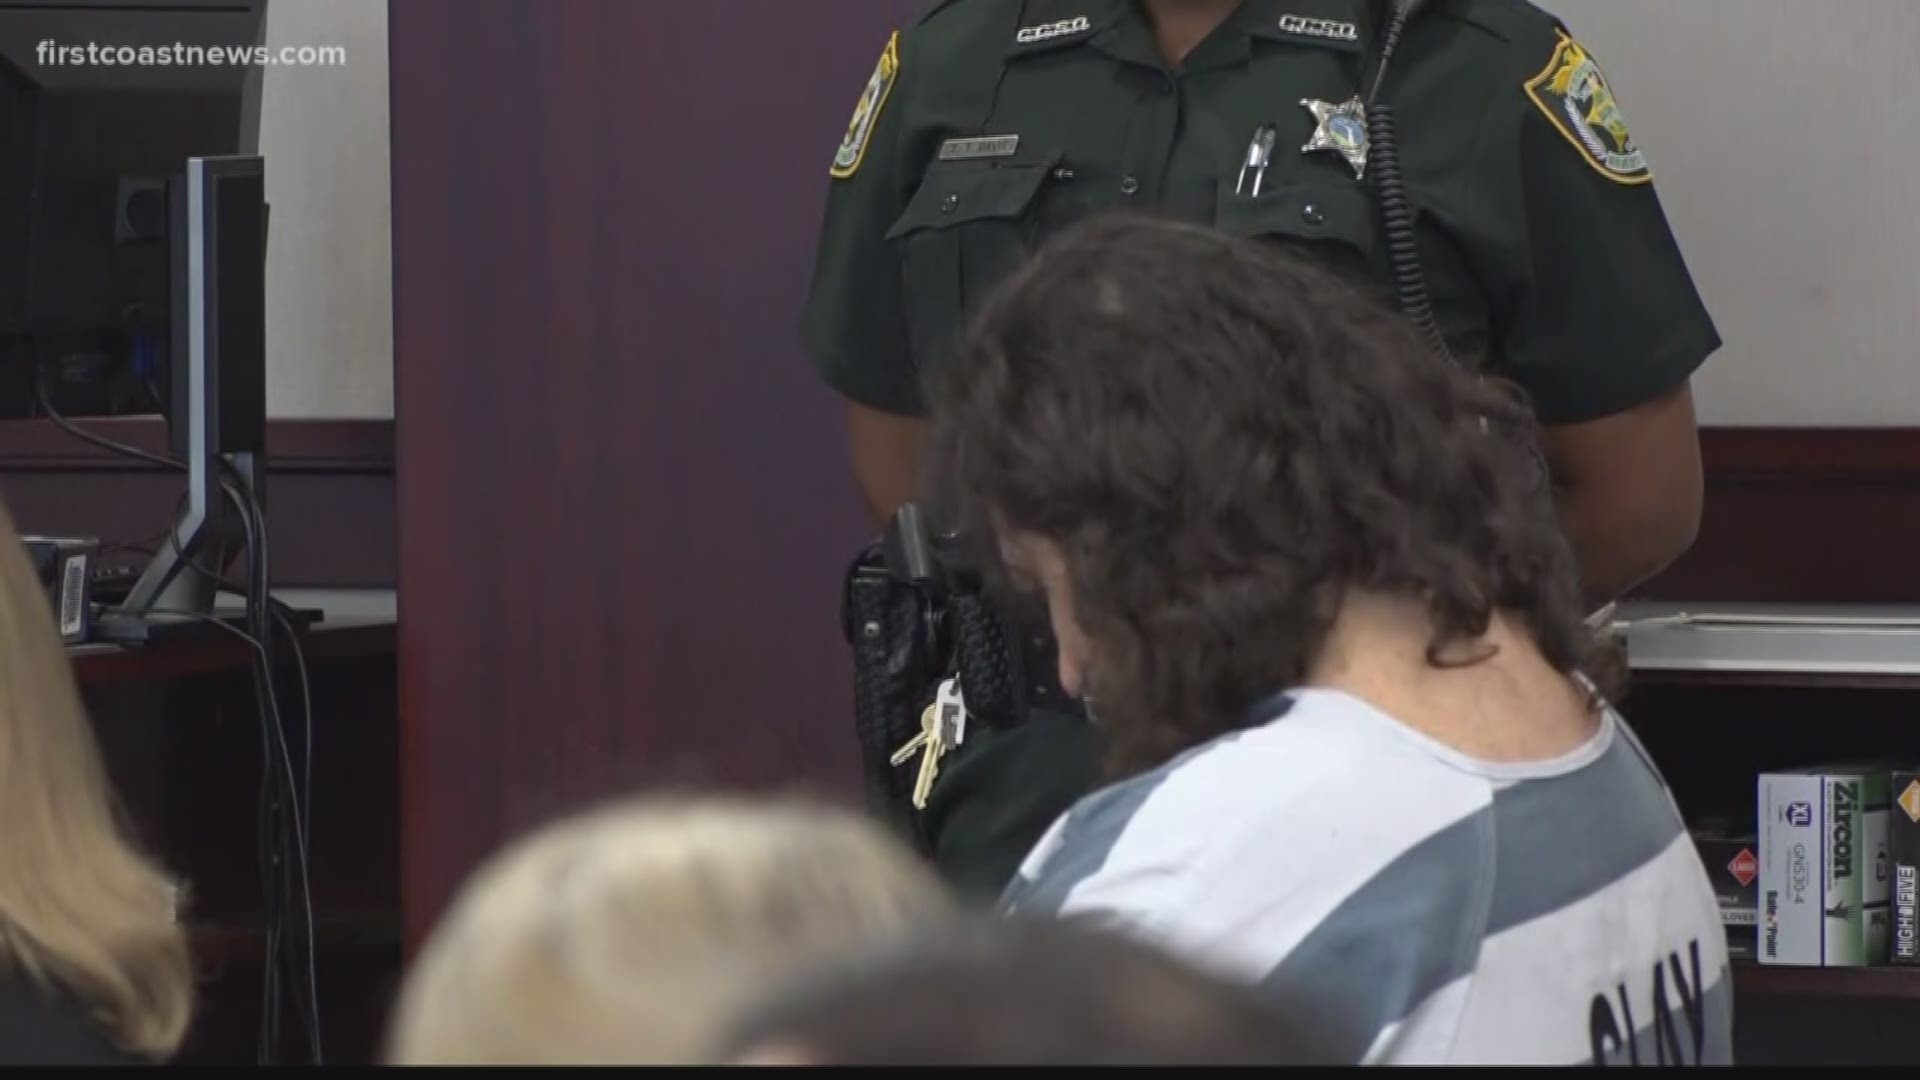 At one point, the child victim's father, too distraught to continue listening, stormed out of the courtroom.